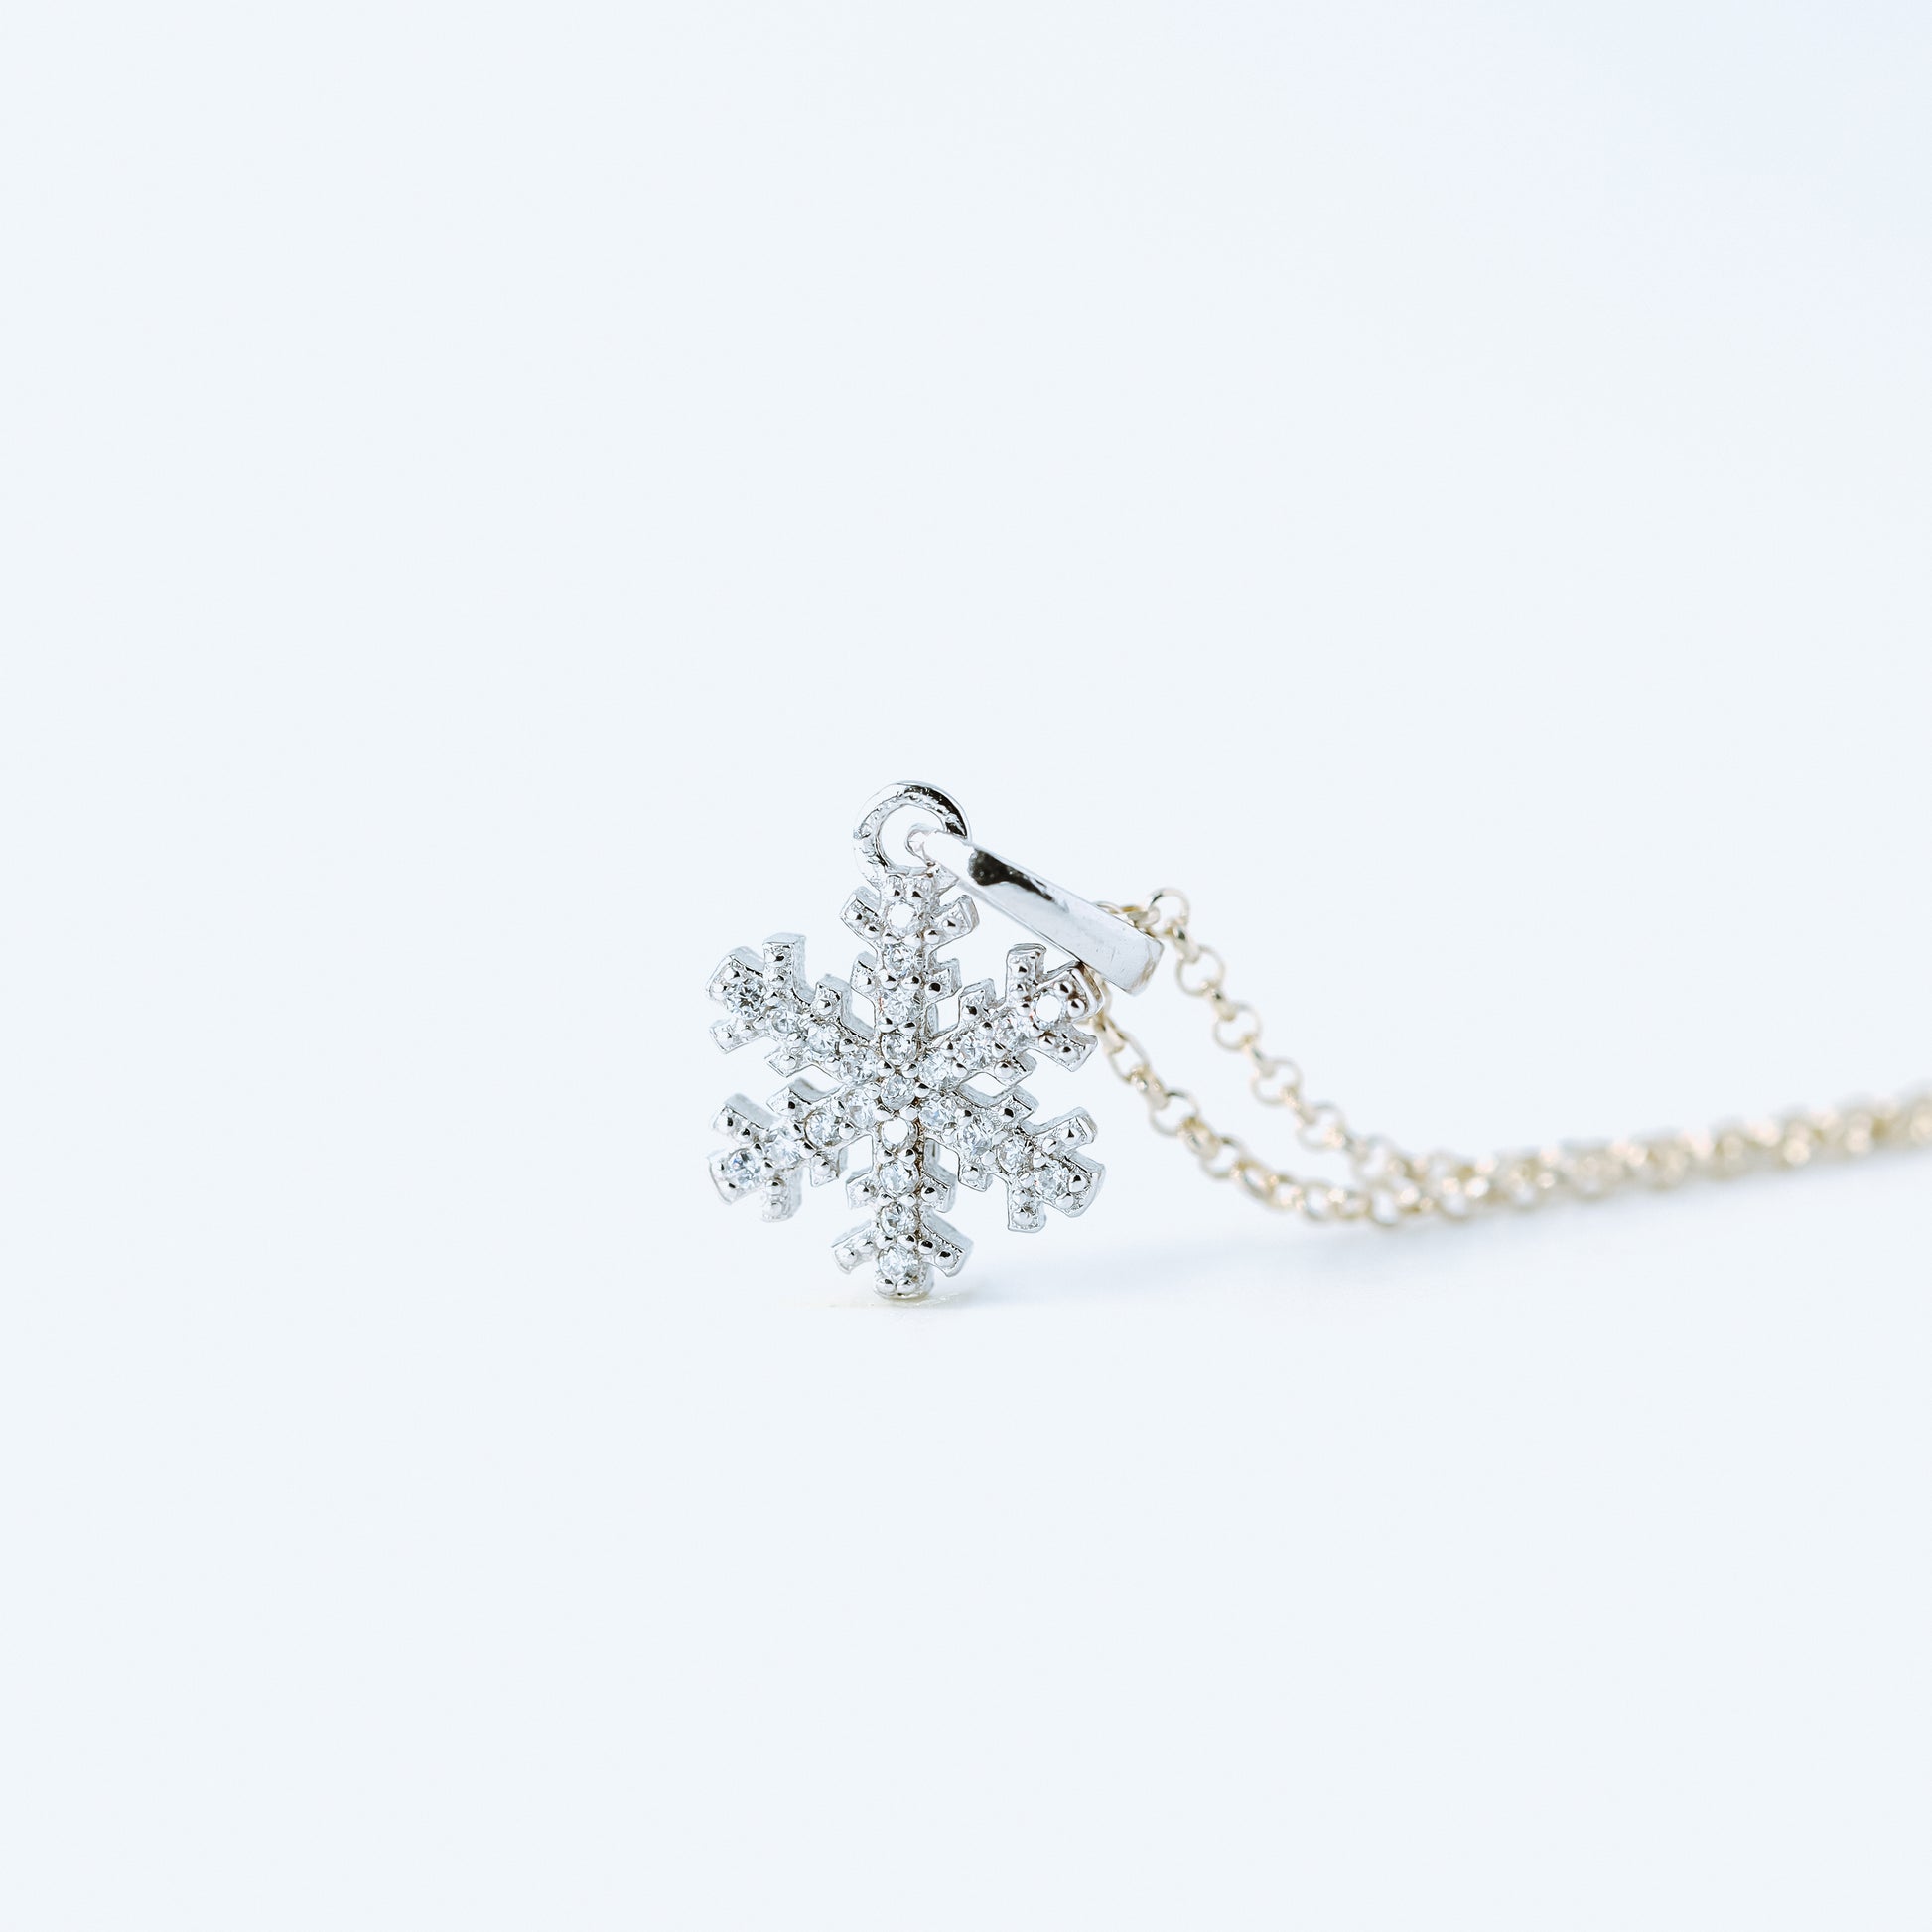 Silver Snowflake Necklace • Dainty Snowflake • Winter Necklace • Snow Necklace • Minimalist Cute Holiday Jewelry for Her • BYSDMJEWELS